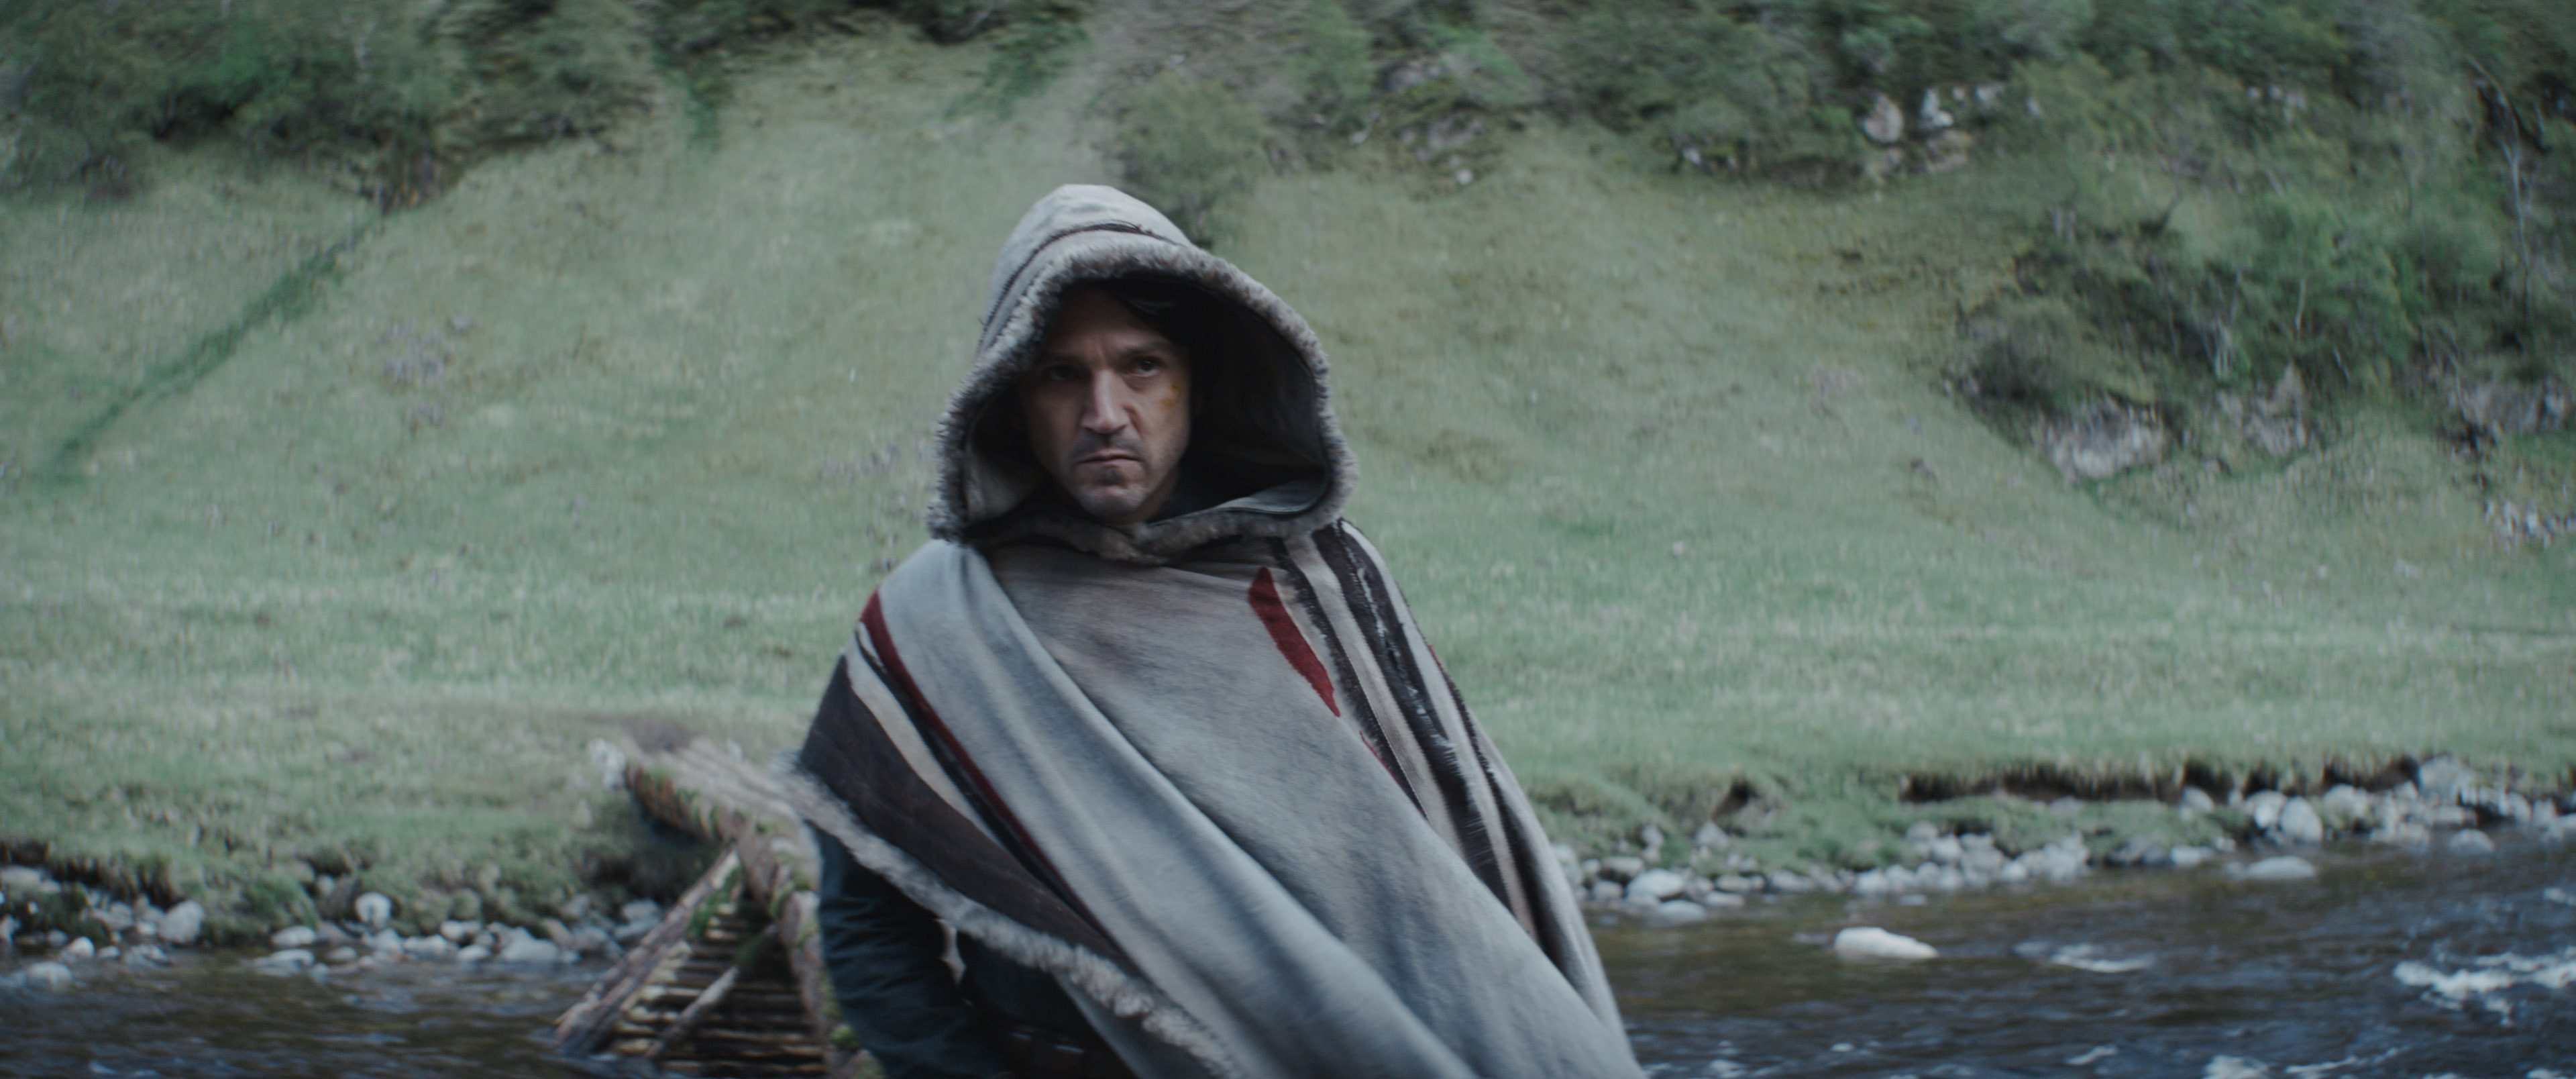 Cassian Andor standing in his poncho glowering at something off-camera. Behind him is a grassy hill